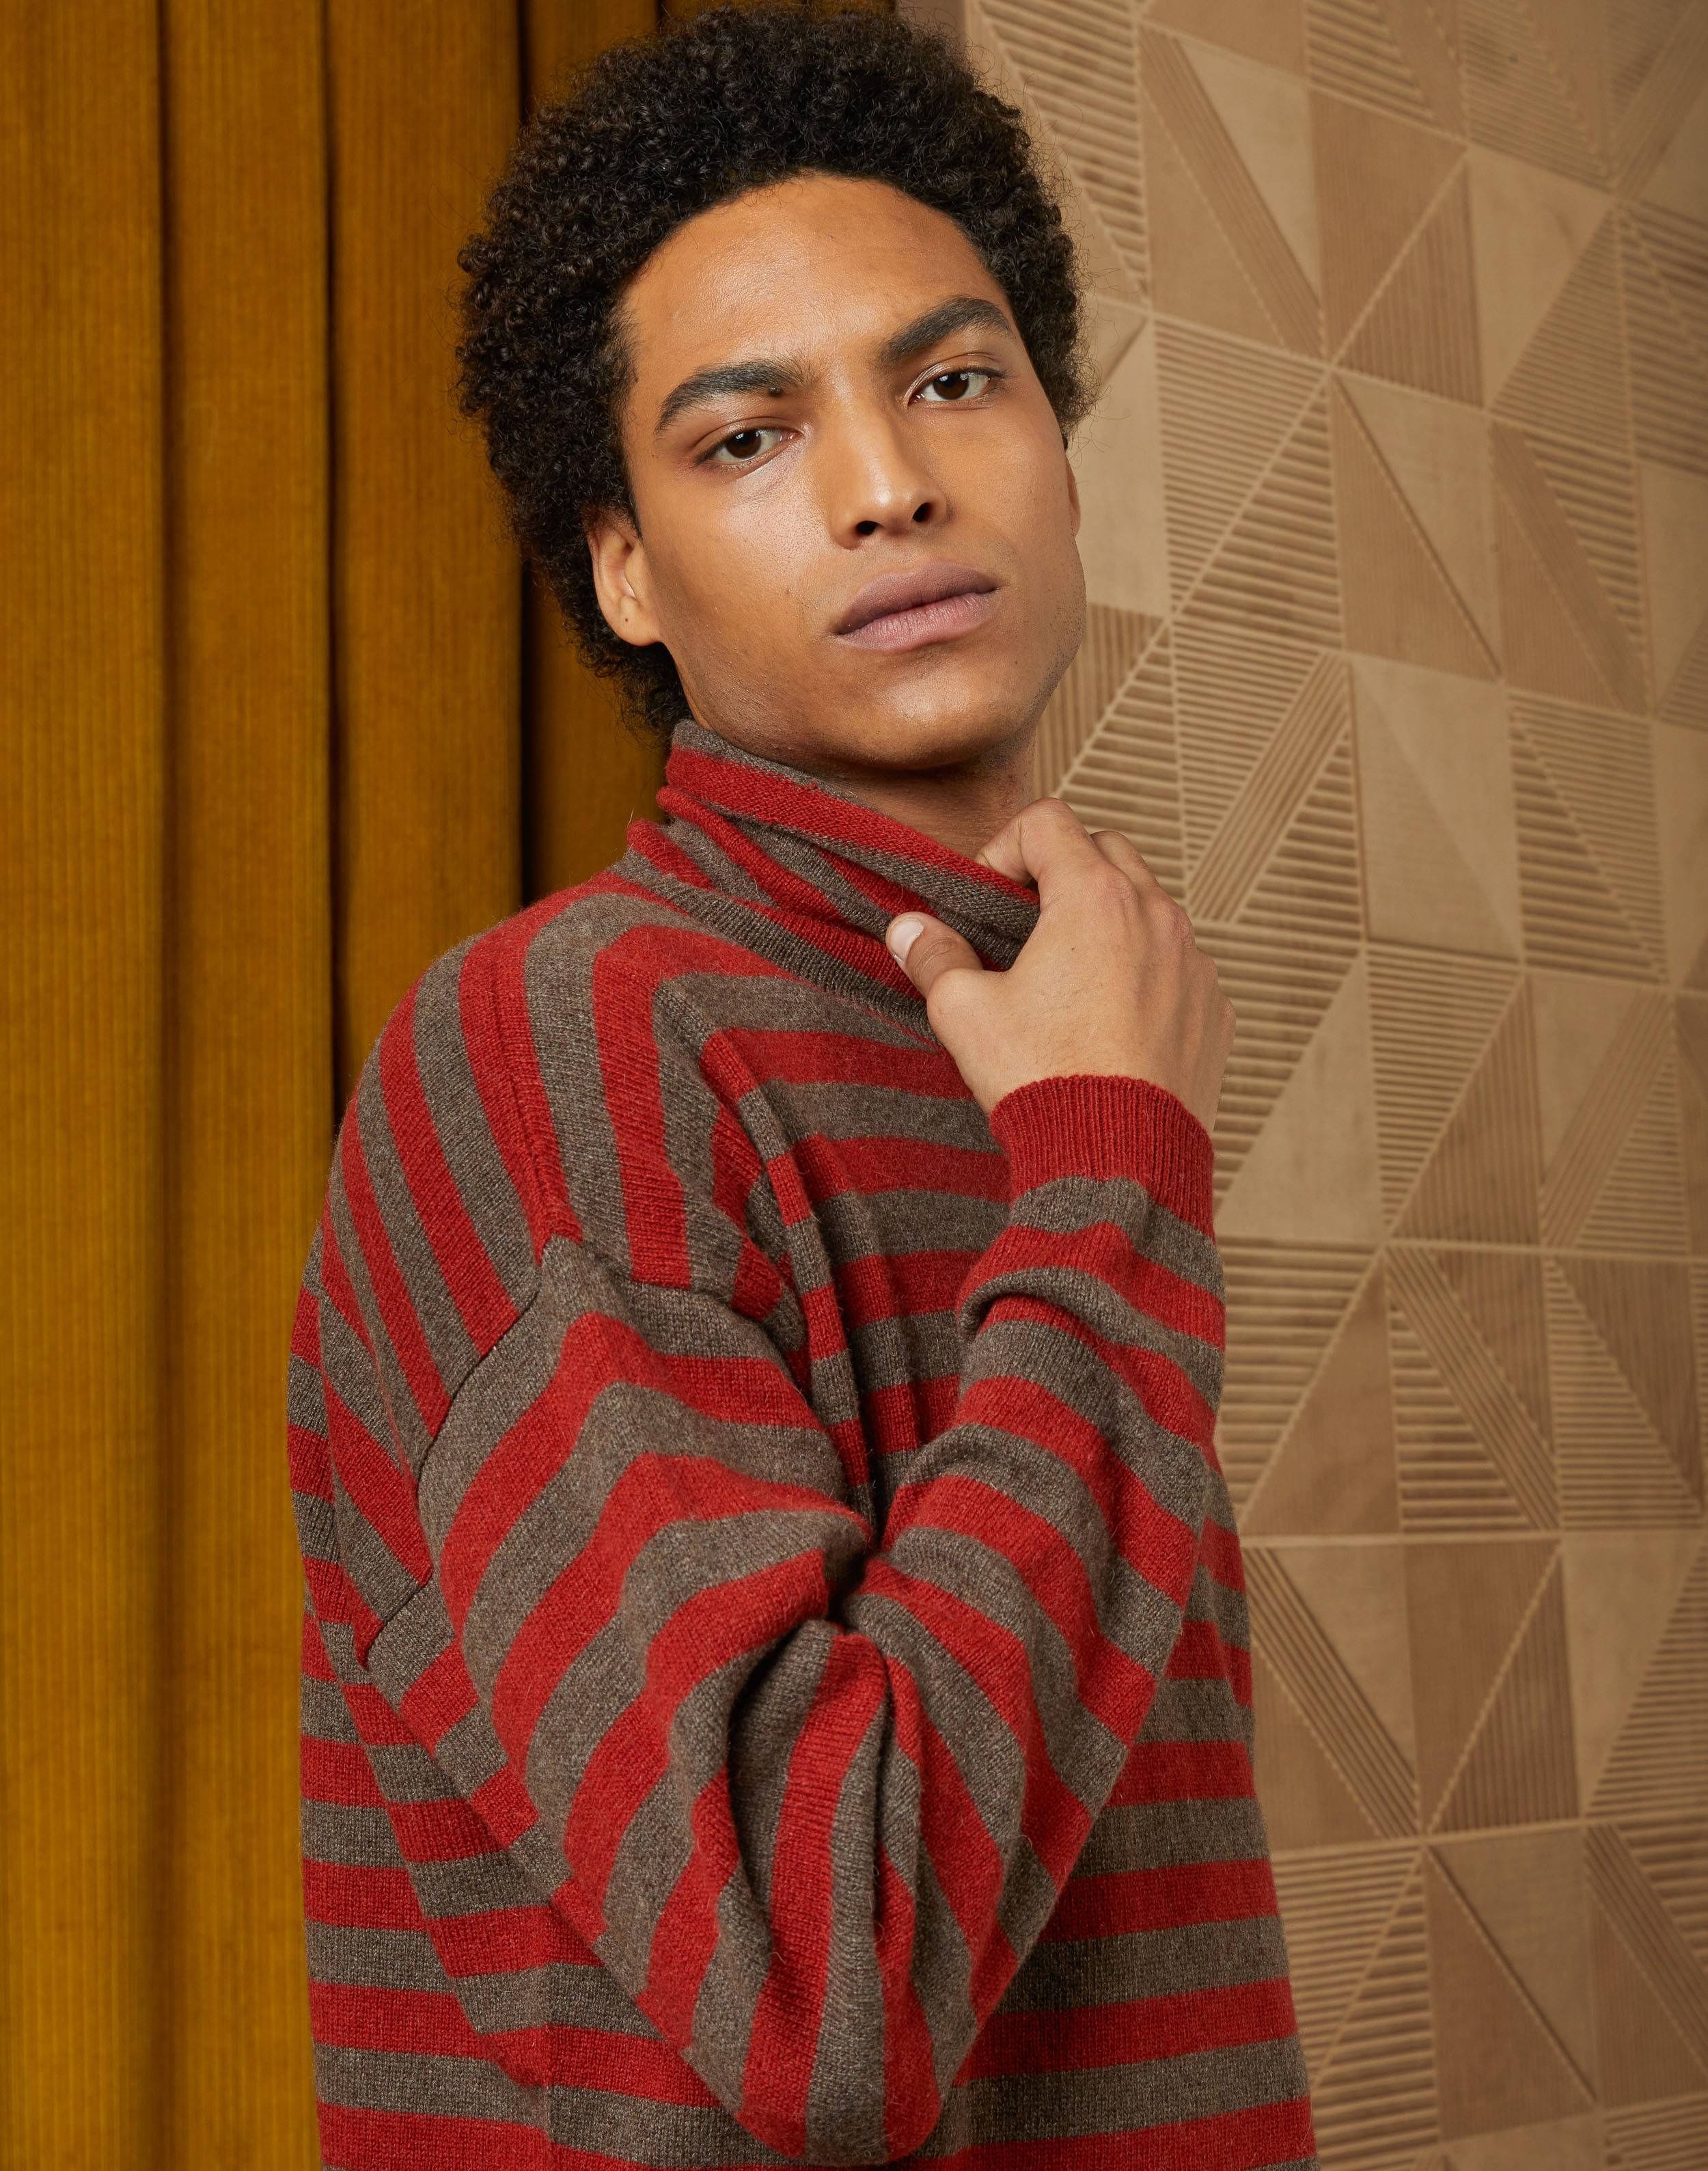 Wool-and-Alpaca turtleneck in grey-and-red stripes